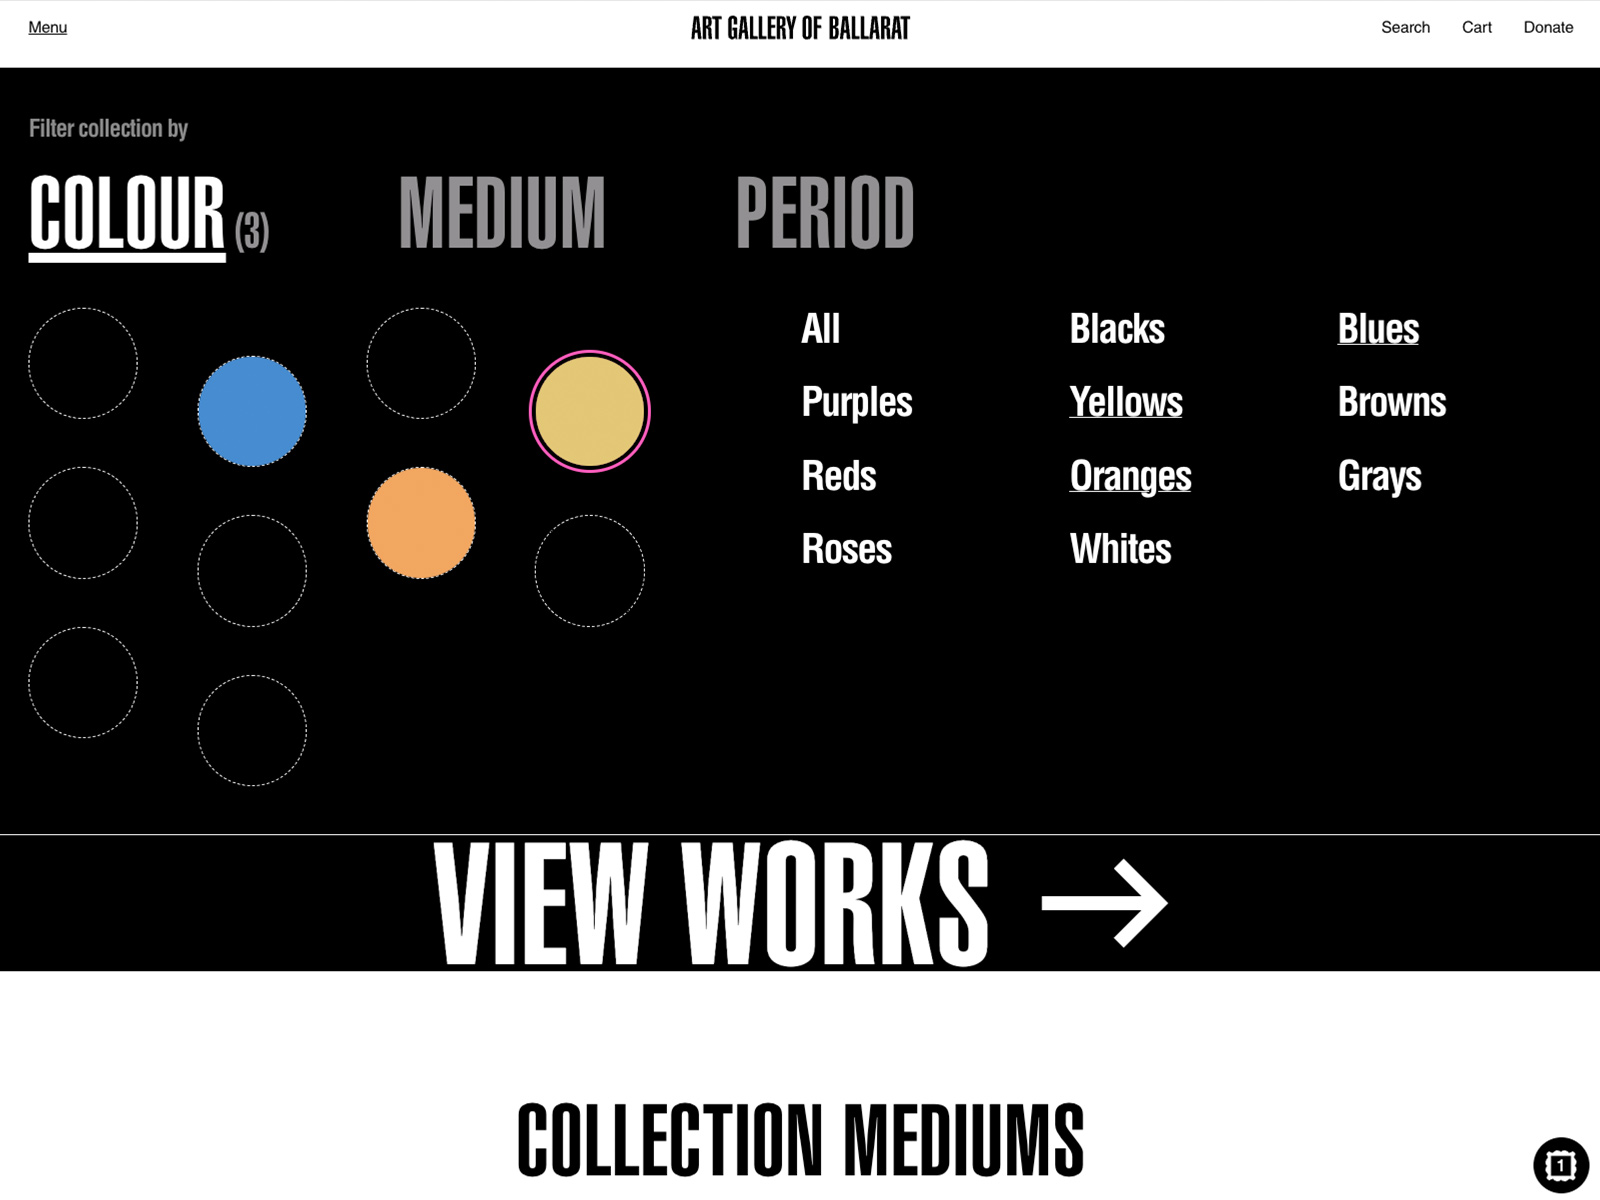 Filter collection by color, medium and period